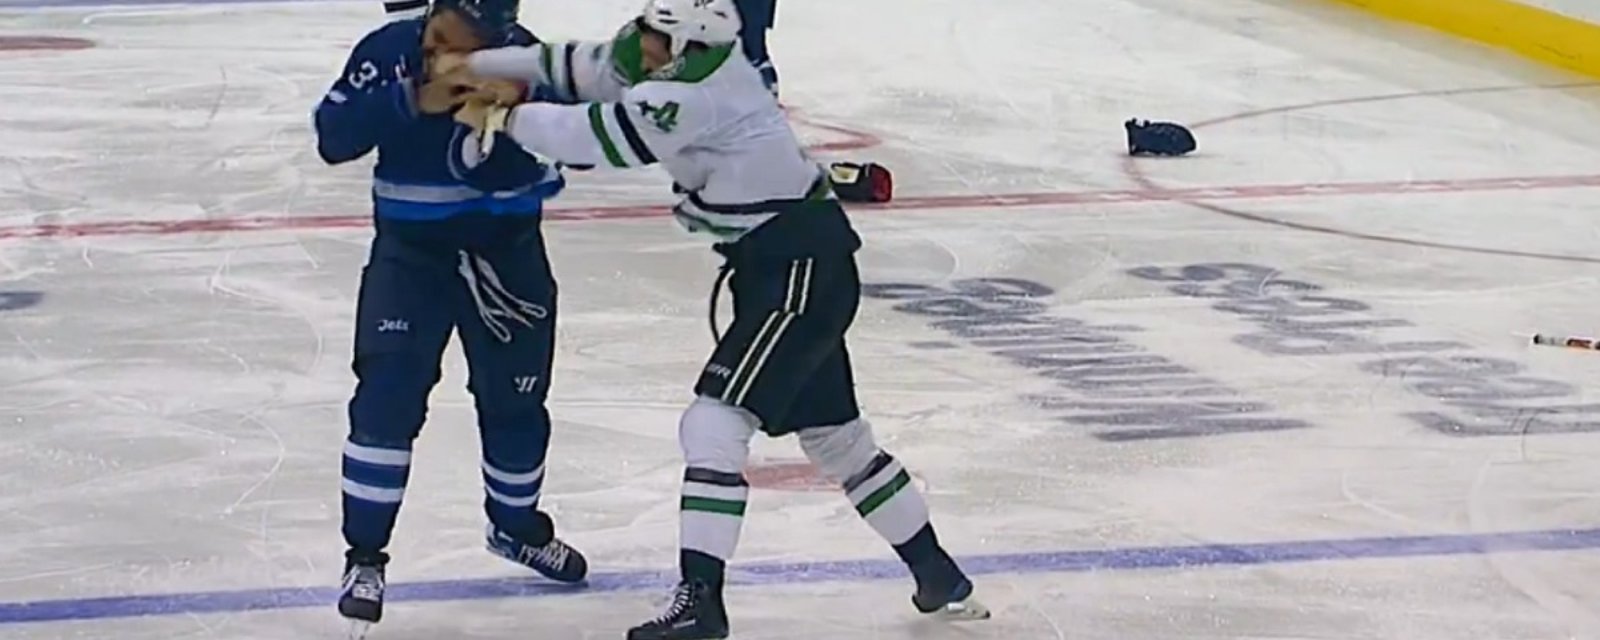 Breaking: Dustin Byfuglien &amp;amp; Jamie Benn drop the gloves and throw heavy punches.